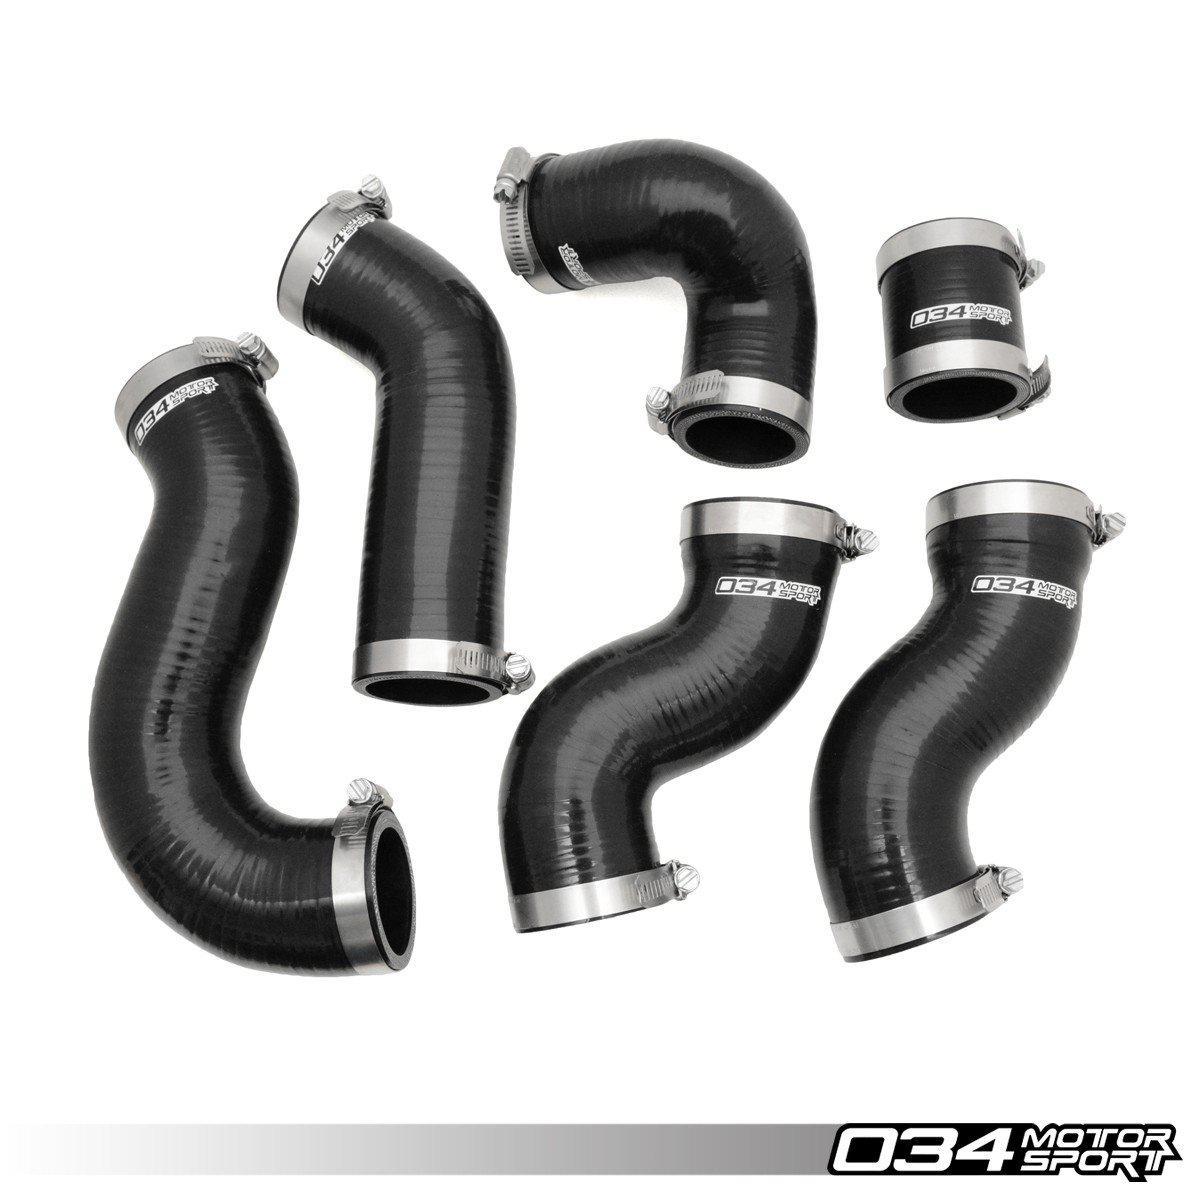 Intercooler Hose Set, Silicone, B5 Audi S4 & C5 Audi A6/Allroad, 2.7T-A Little Tuning Co